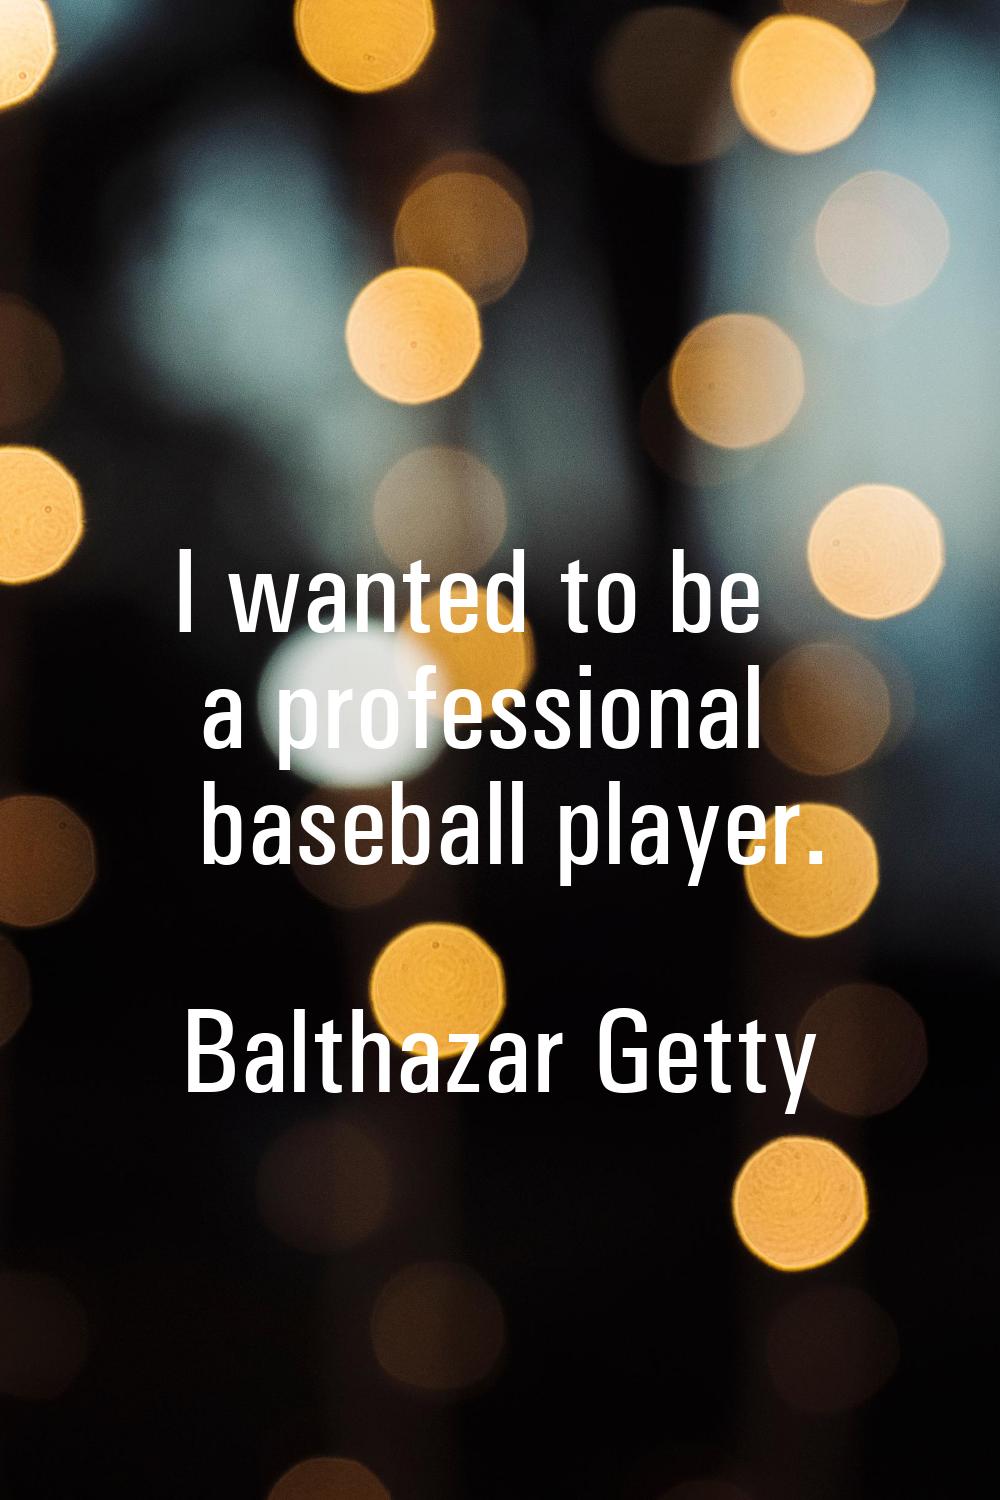 I wanted to be a professional baseball player.